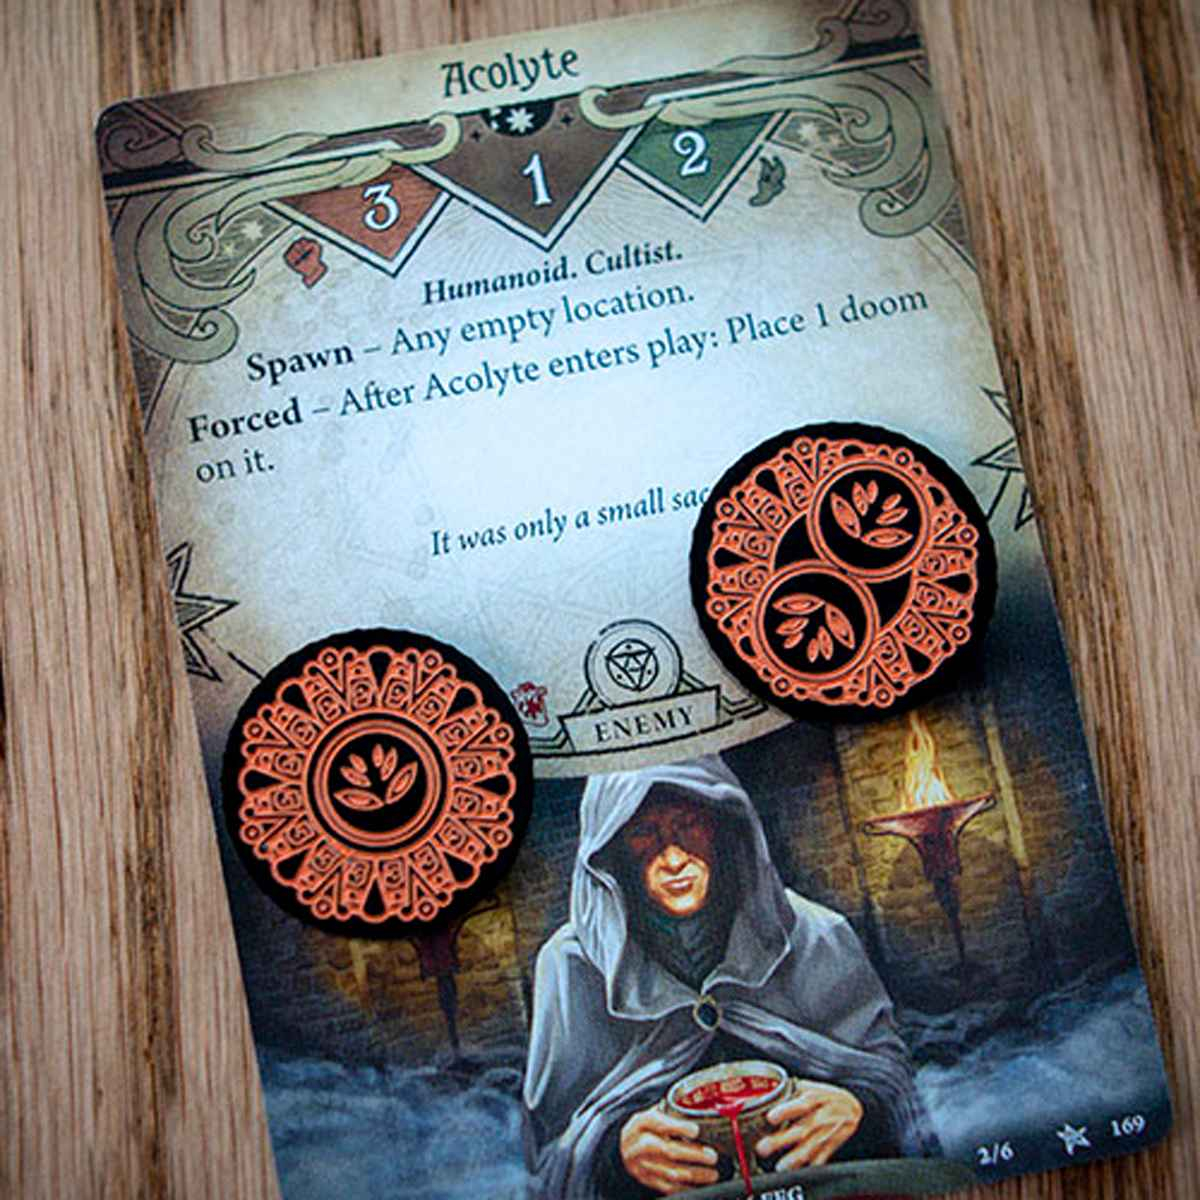 The one-value side and the two-value side of the Forgotten Limited Edition Doom Token represented by two different tokens on top of the Arkham Horror LCG card, Acolyte